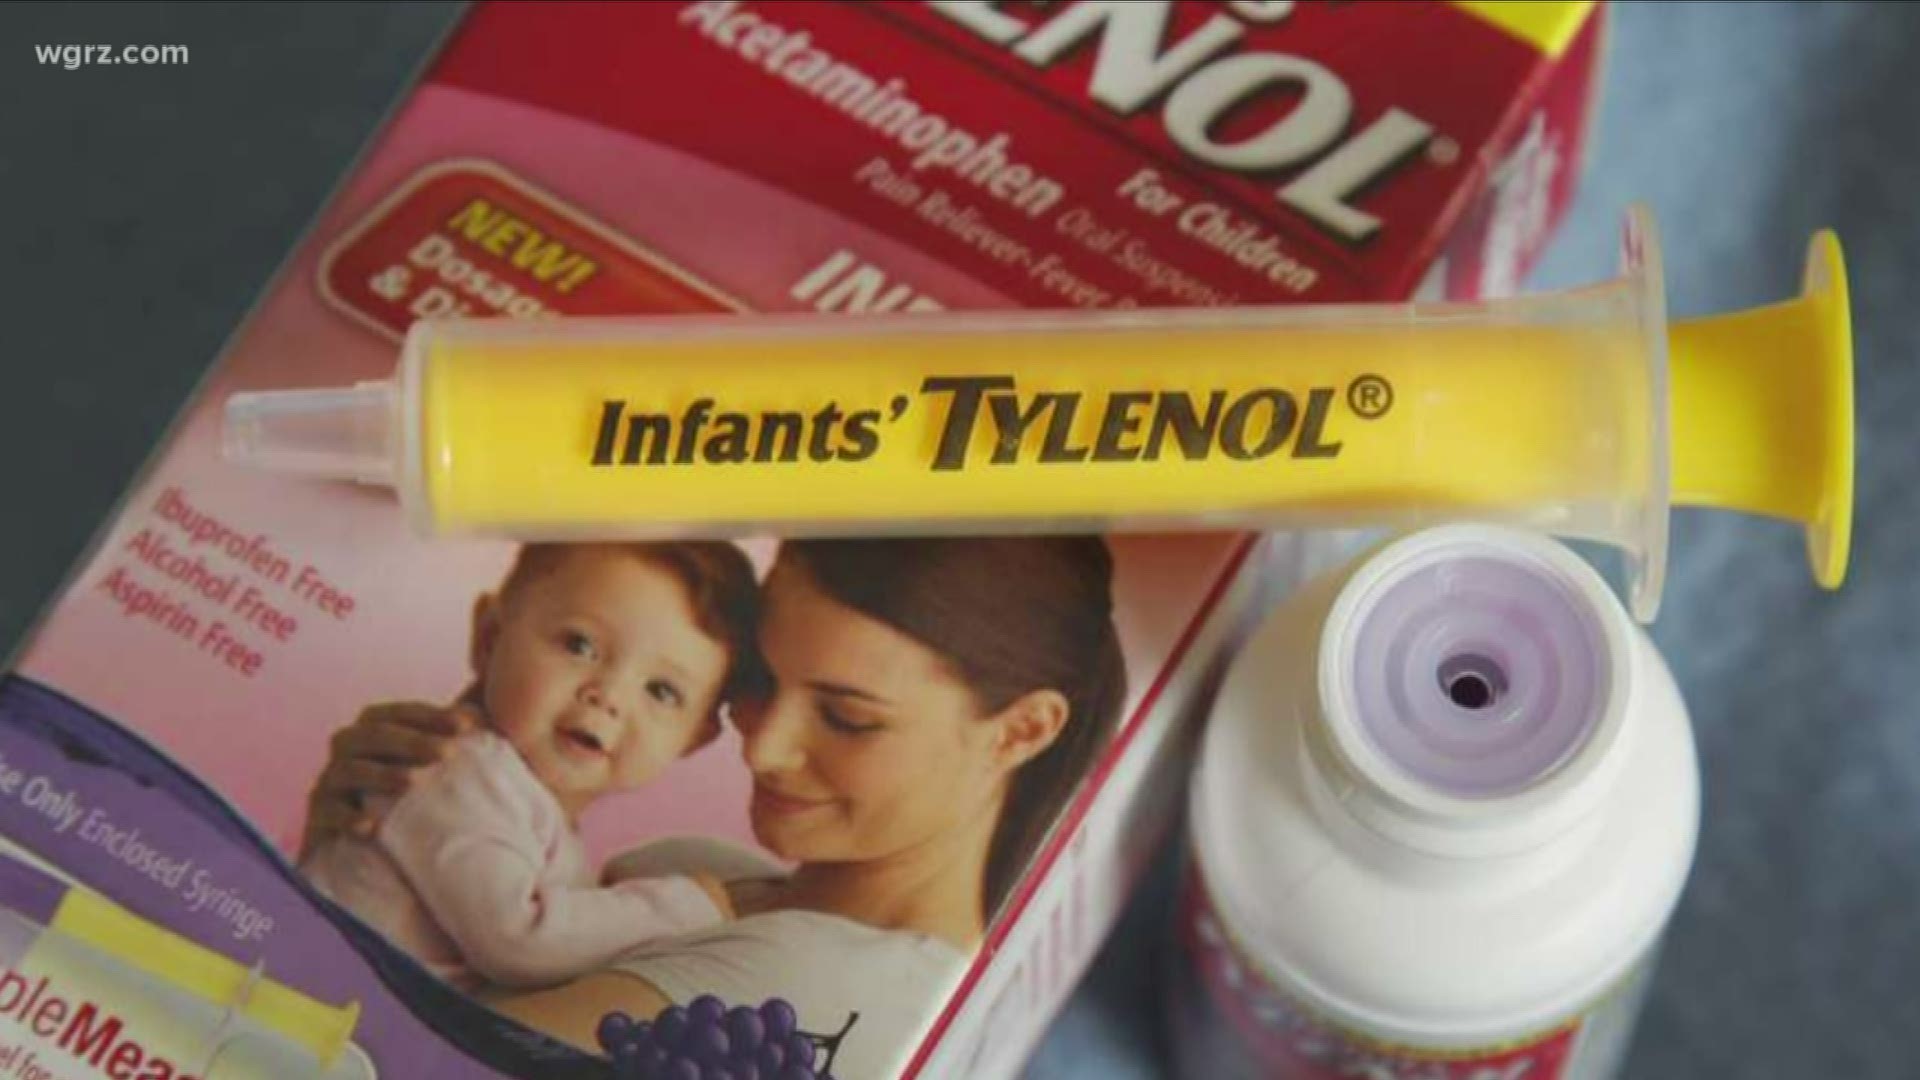 If you bought Infants' Tylenol in the last five years... you could possibly receive a portion of a multi-million-dollar settlement from Johnson & Johnson.